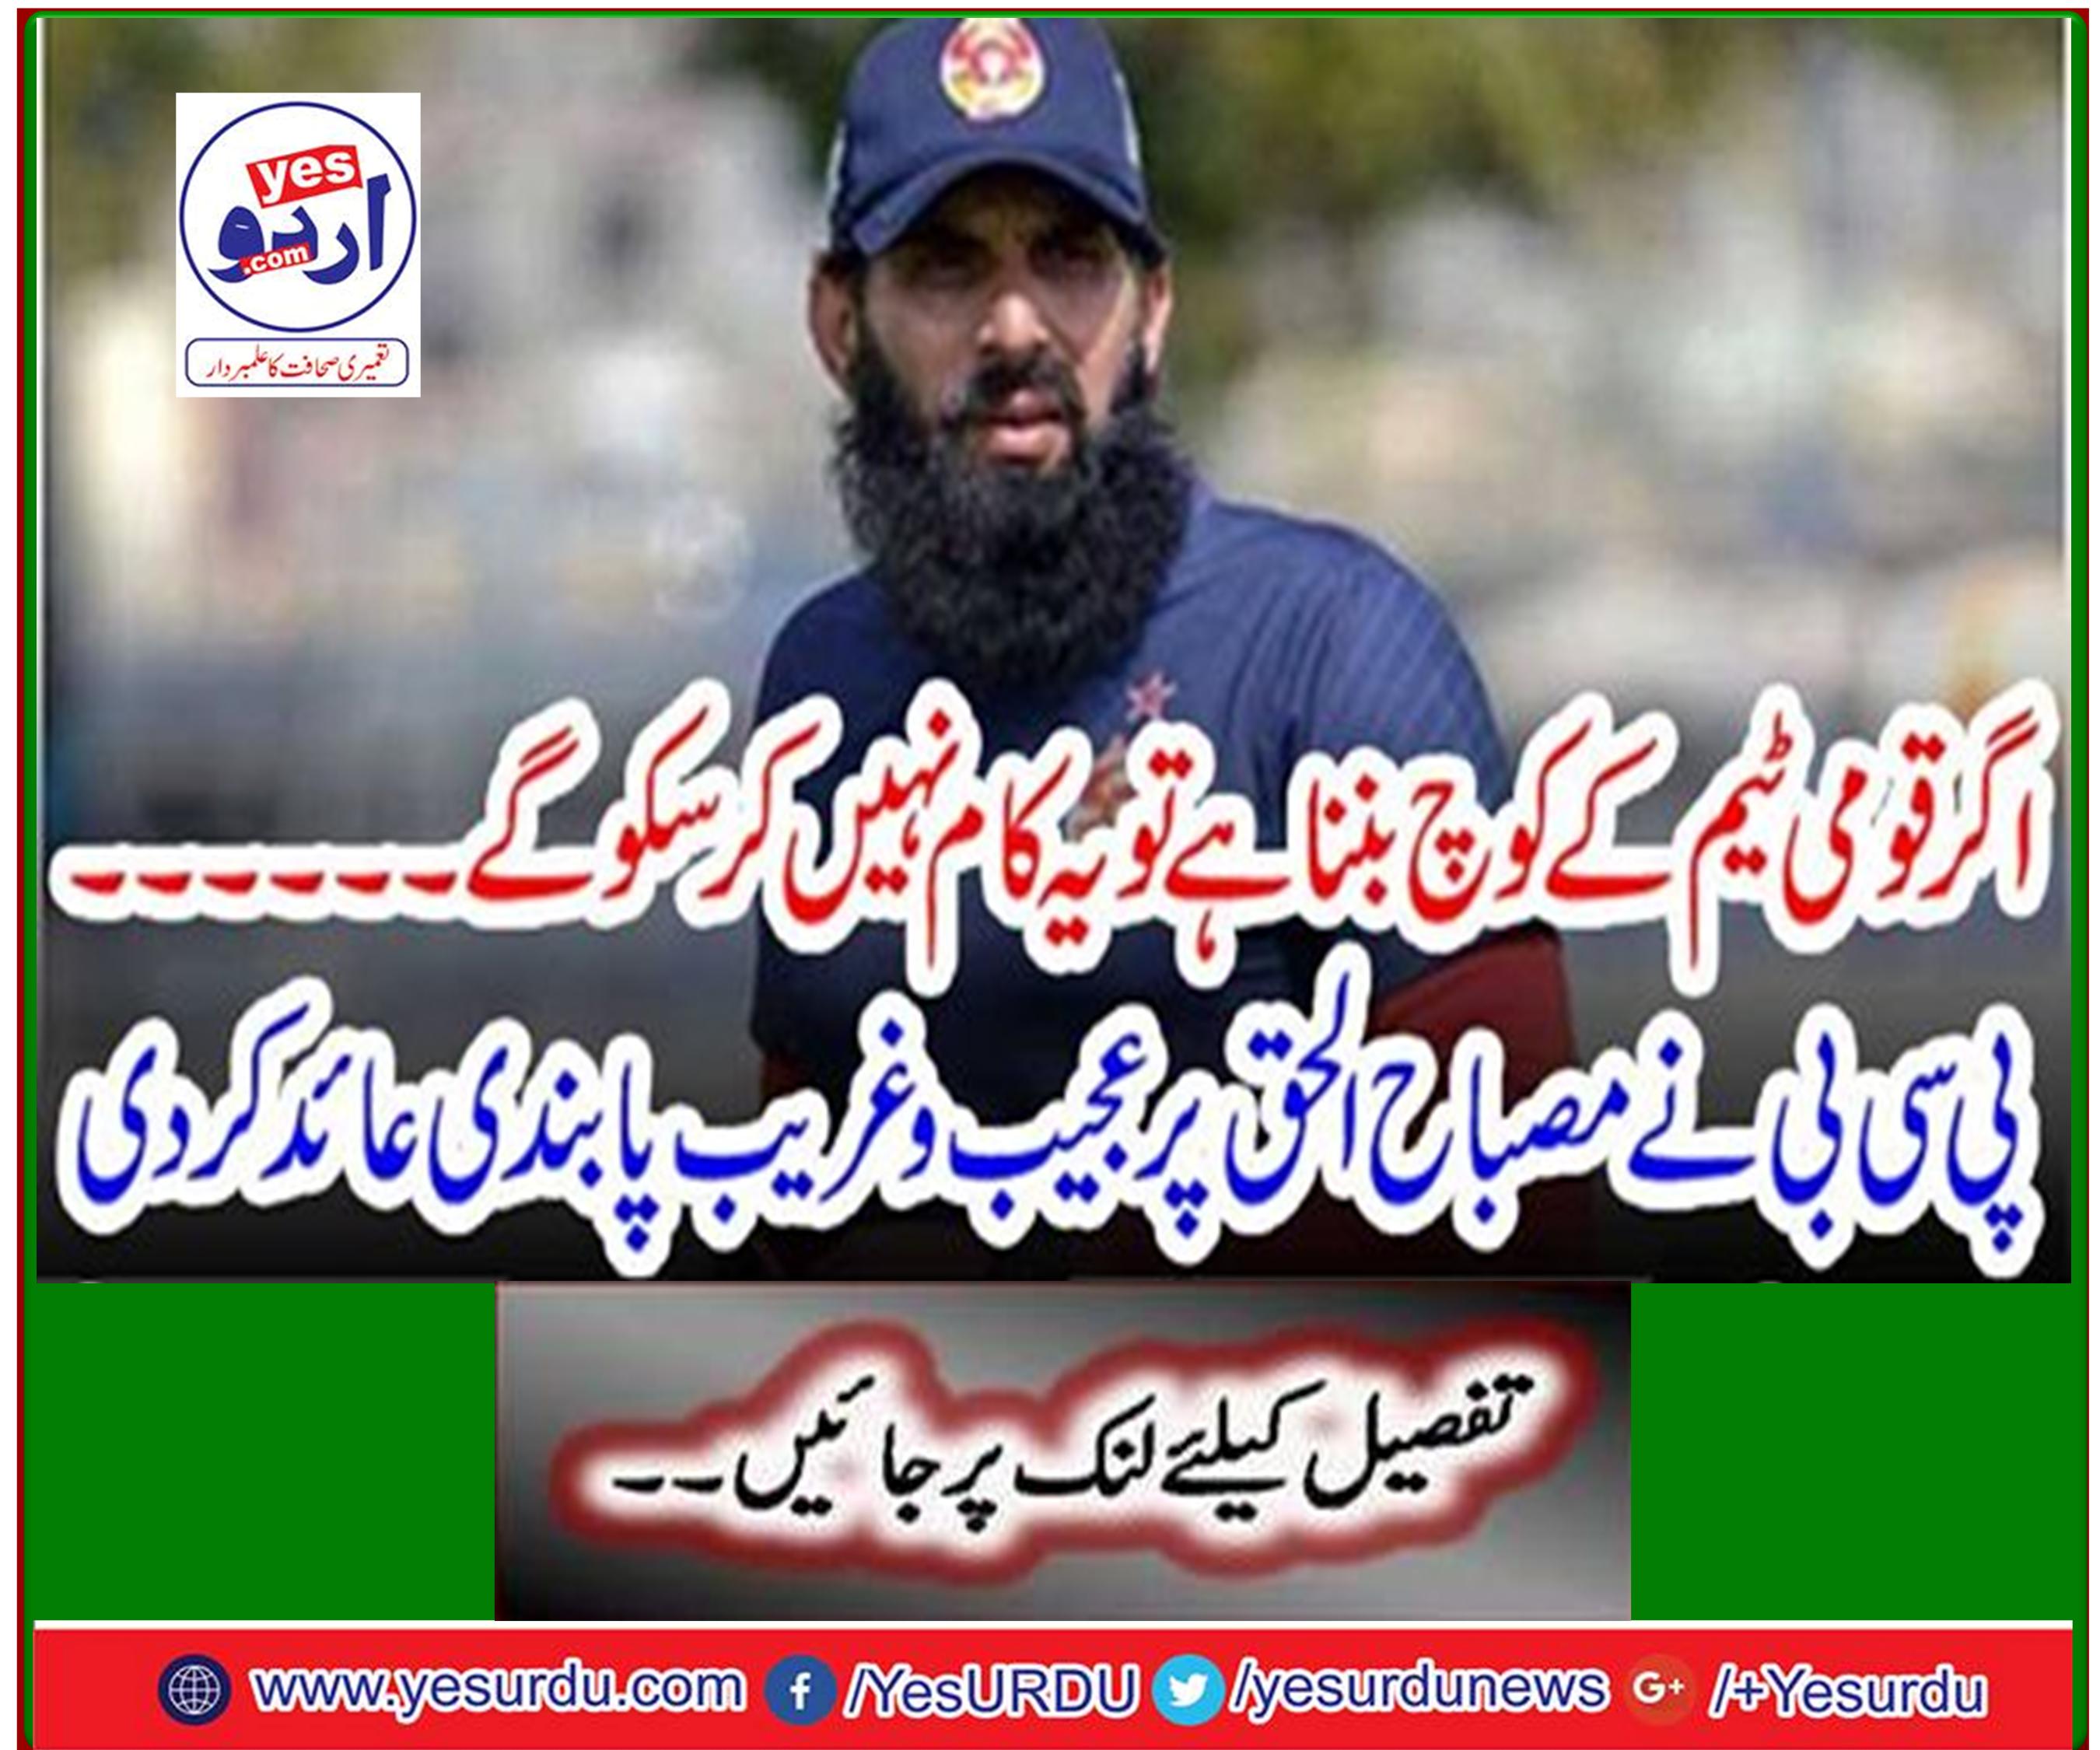 The PCB imposed a strange ban on Misbah-ul-Haq